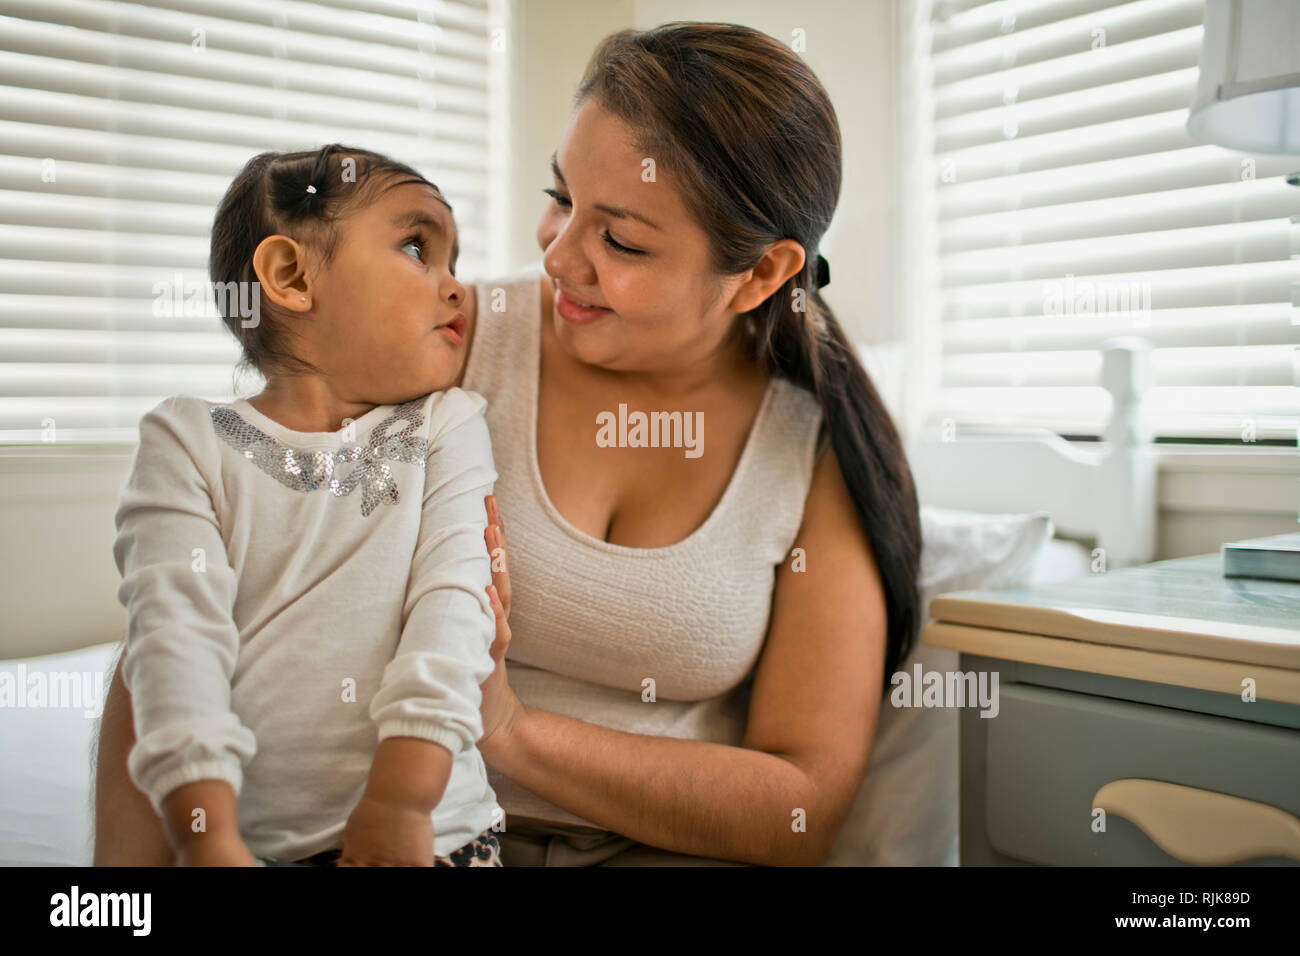 Happy mother and toddler smiling at one another. Stock Photo